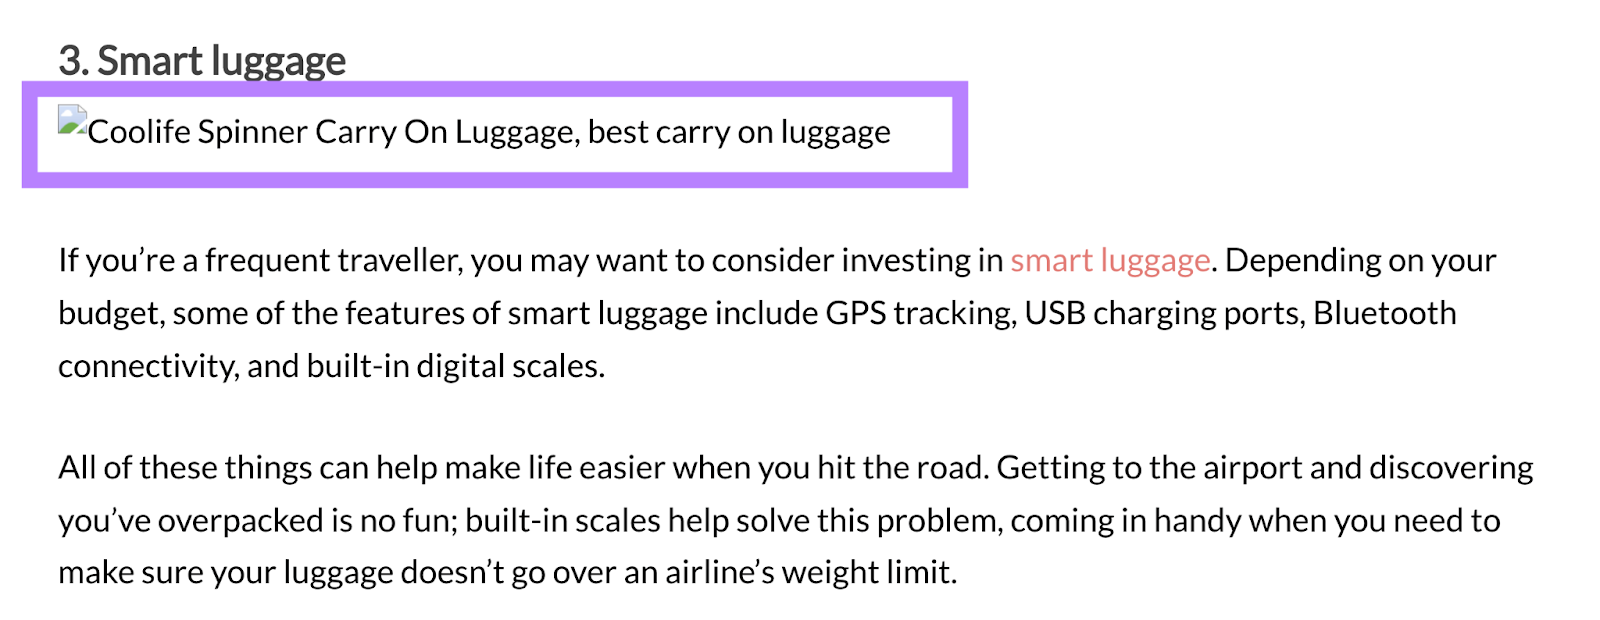 in place of an image, there's a ripped image icon with the alt text coolife spinner carry on luggage